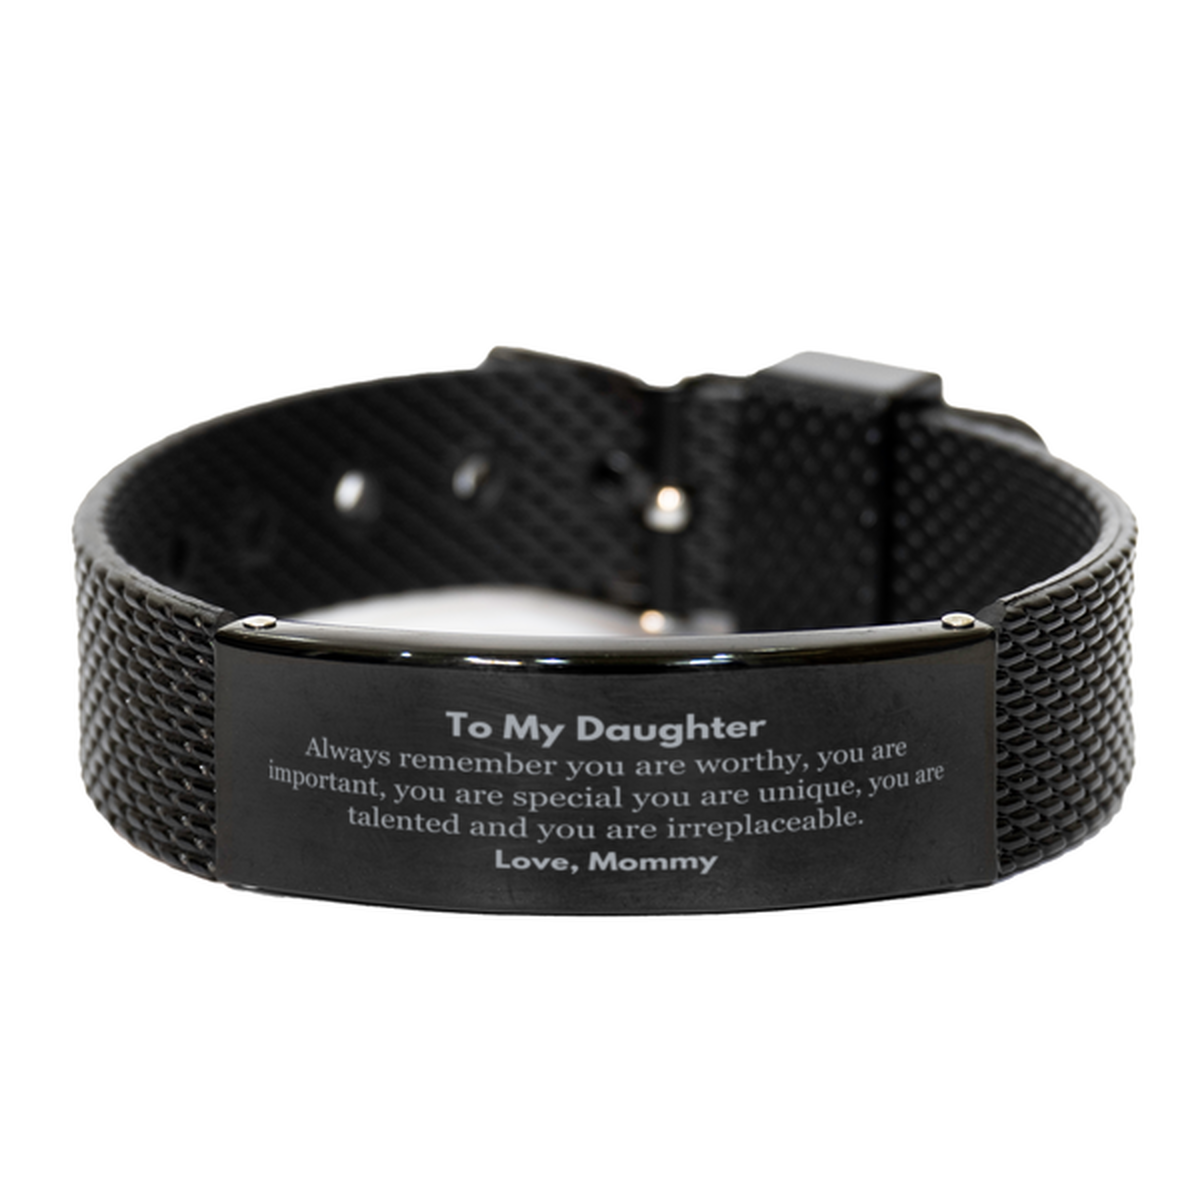 Daughter Birthday Gifts from Mommy, Inspirational Black Shark Mesh Bracelet for Daughter Christmas Graduation Gifts for Daughter Always remember you are worthy, you are important. Love, Mommy